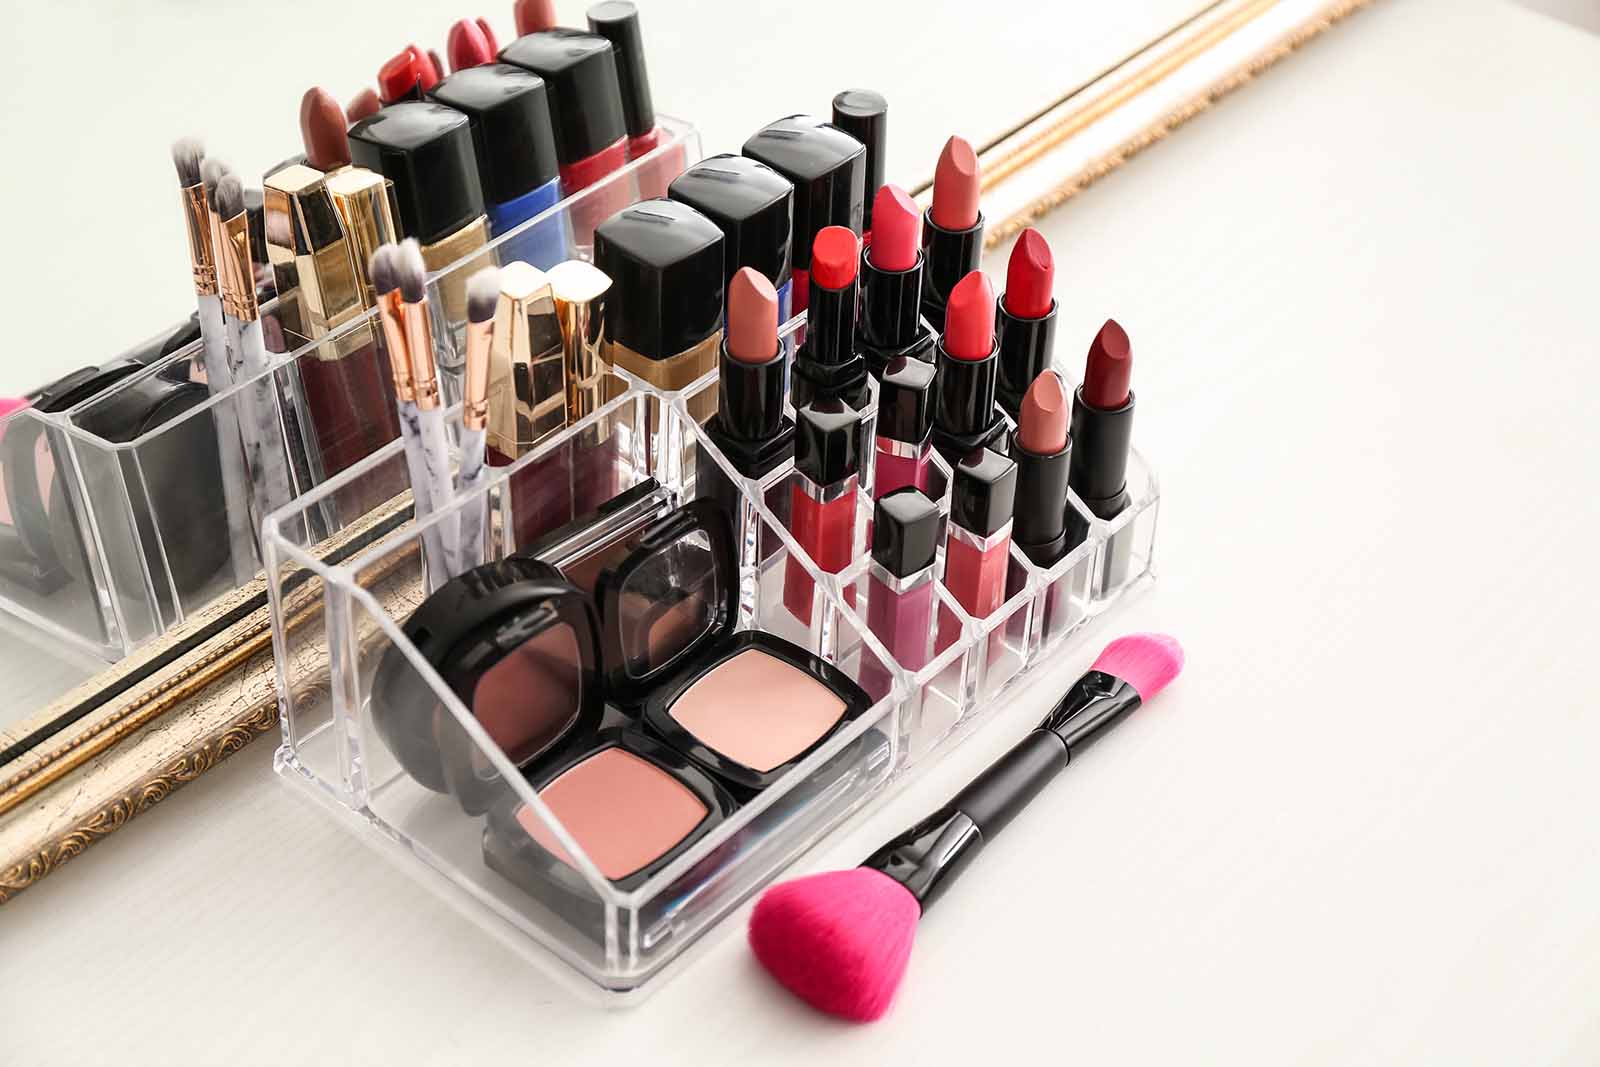 10 Easy Steps to Clean Makeup Brushes at Home